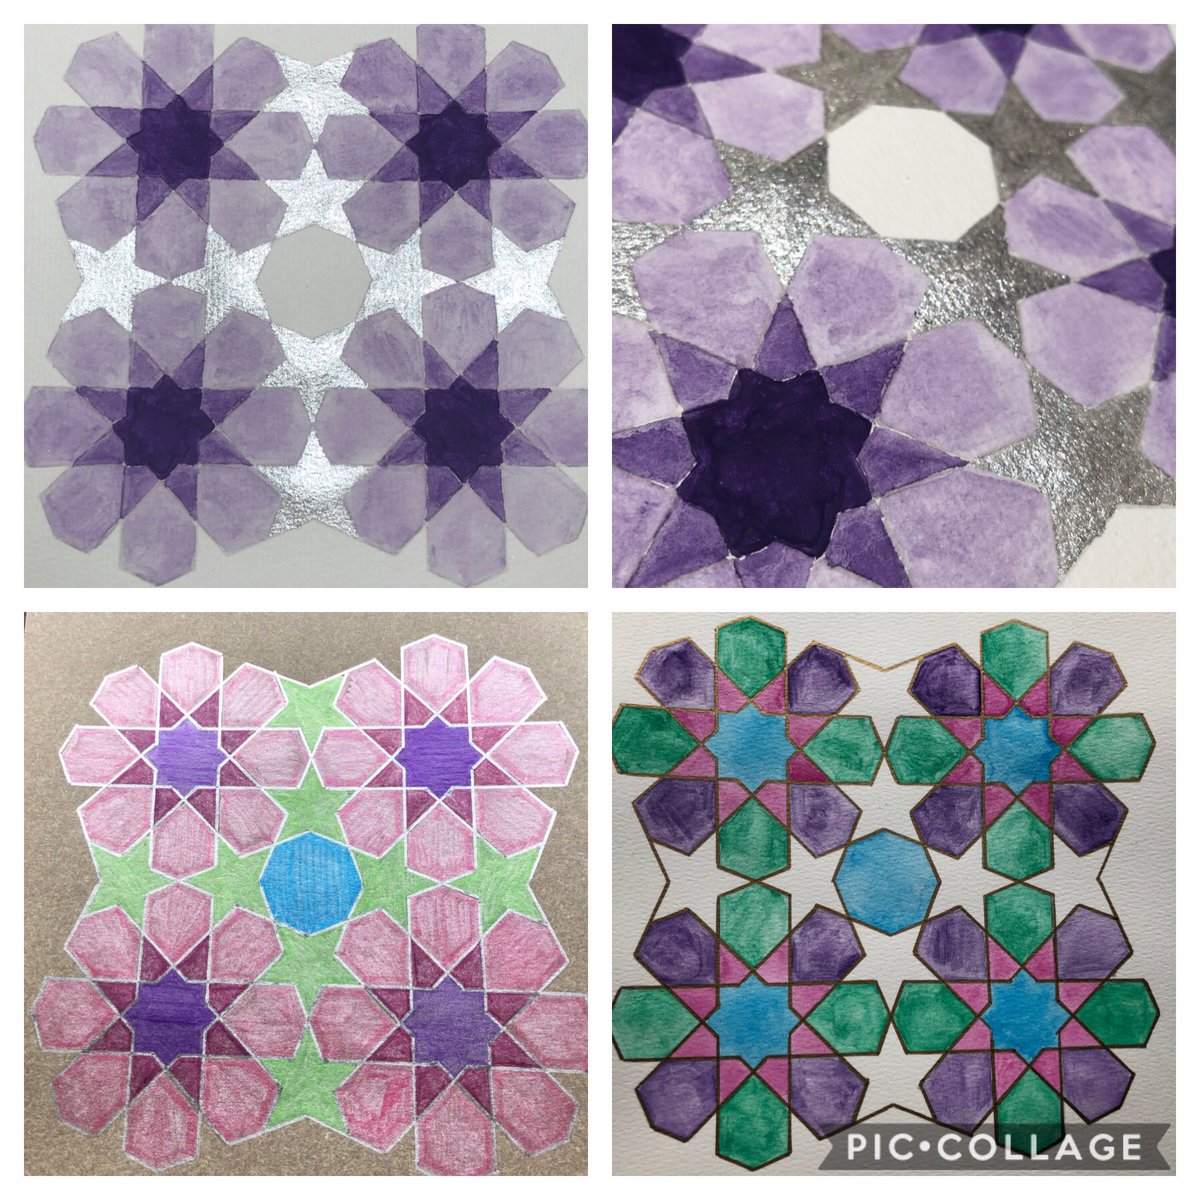 A fab 4th session of #itga. Loved the Islamic tiles and using watercolours. Experimented with a few colour options! @c0mplexnumber #artfulaugust